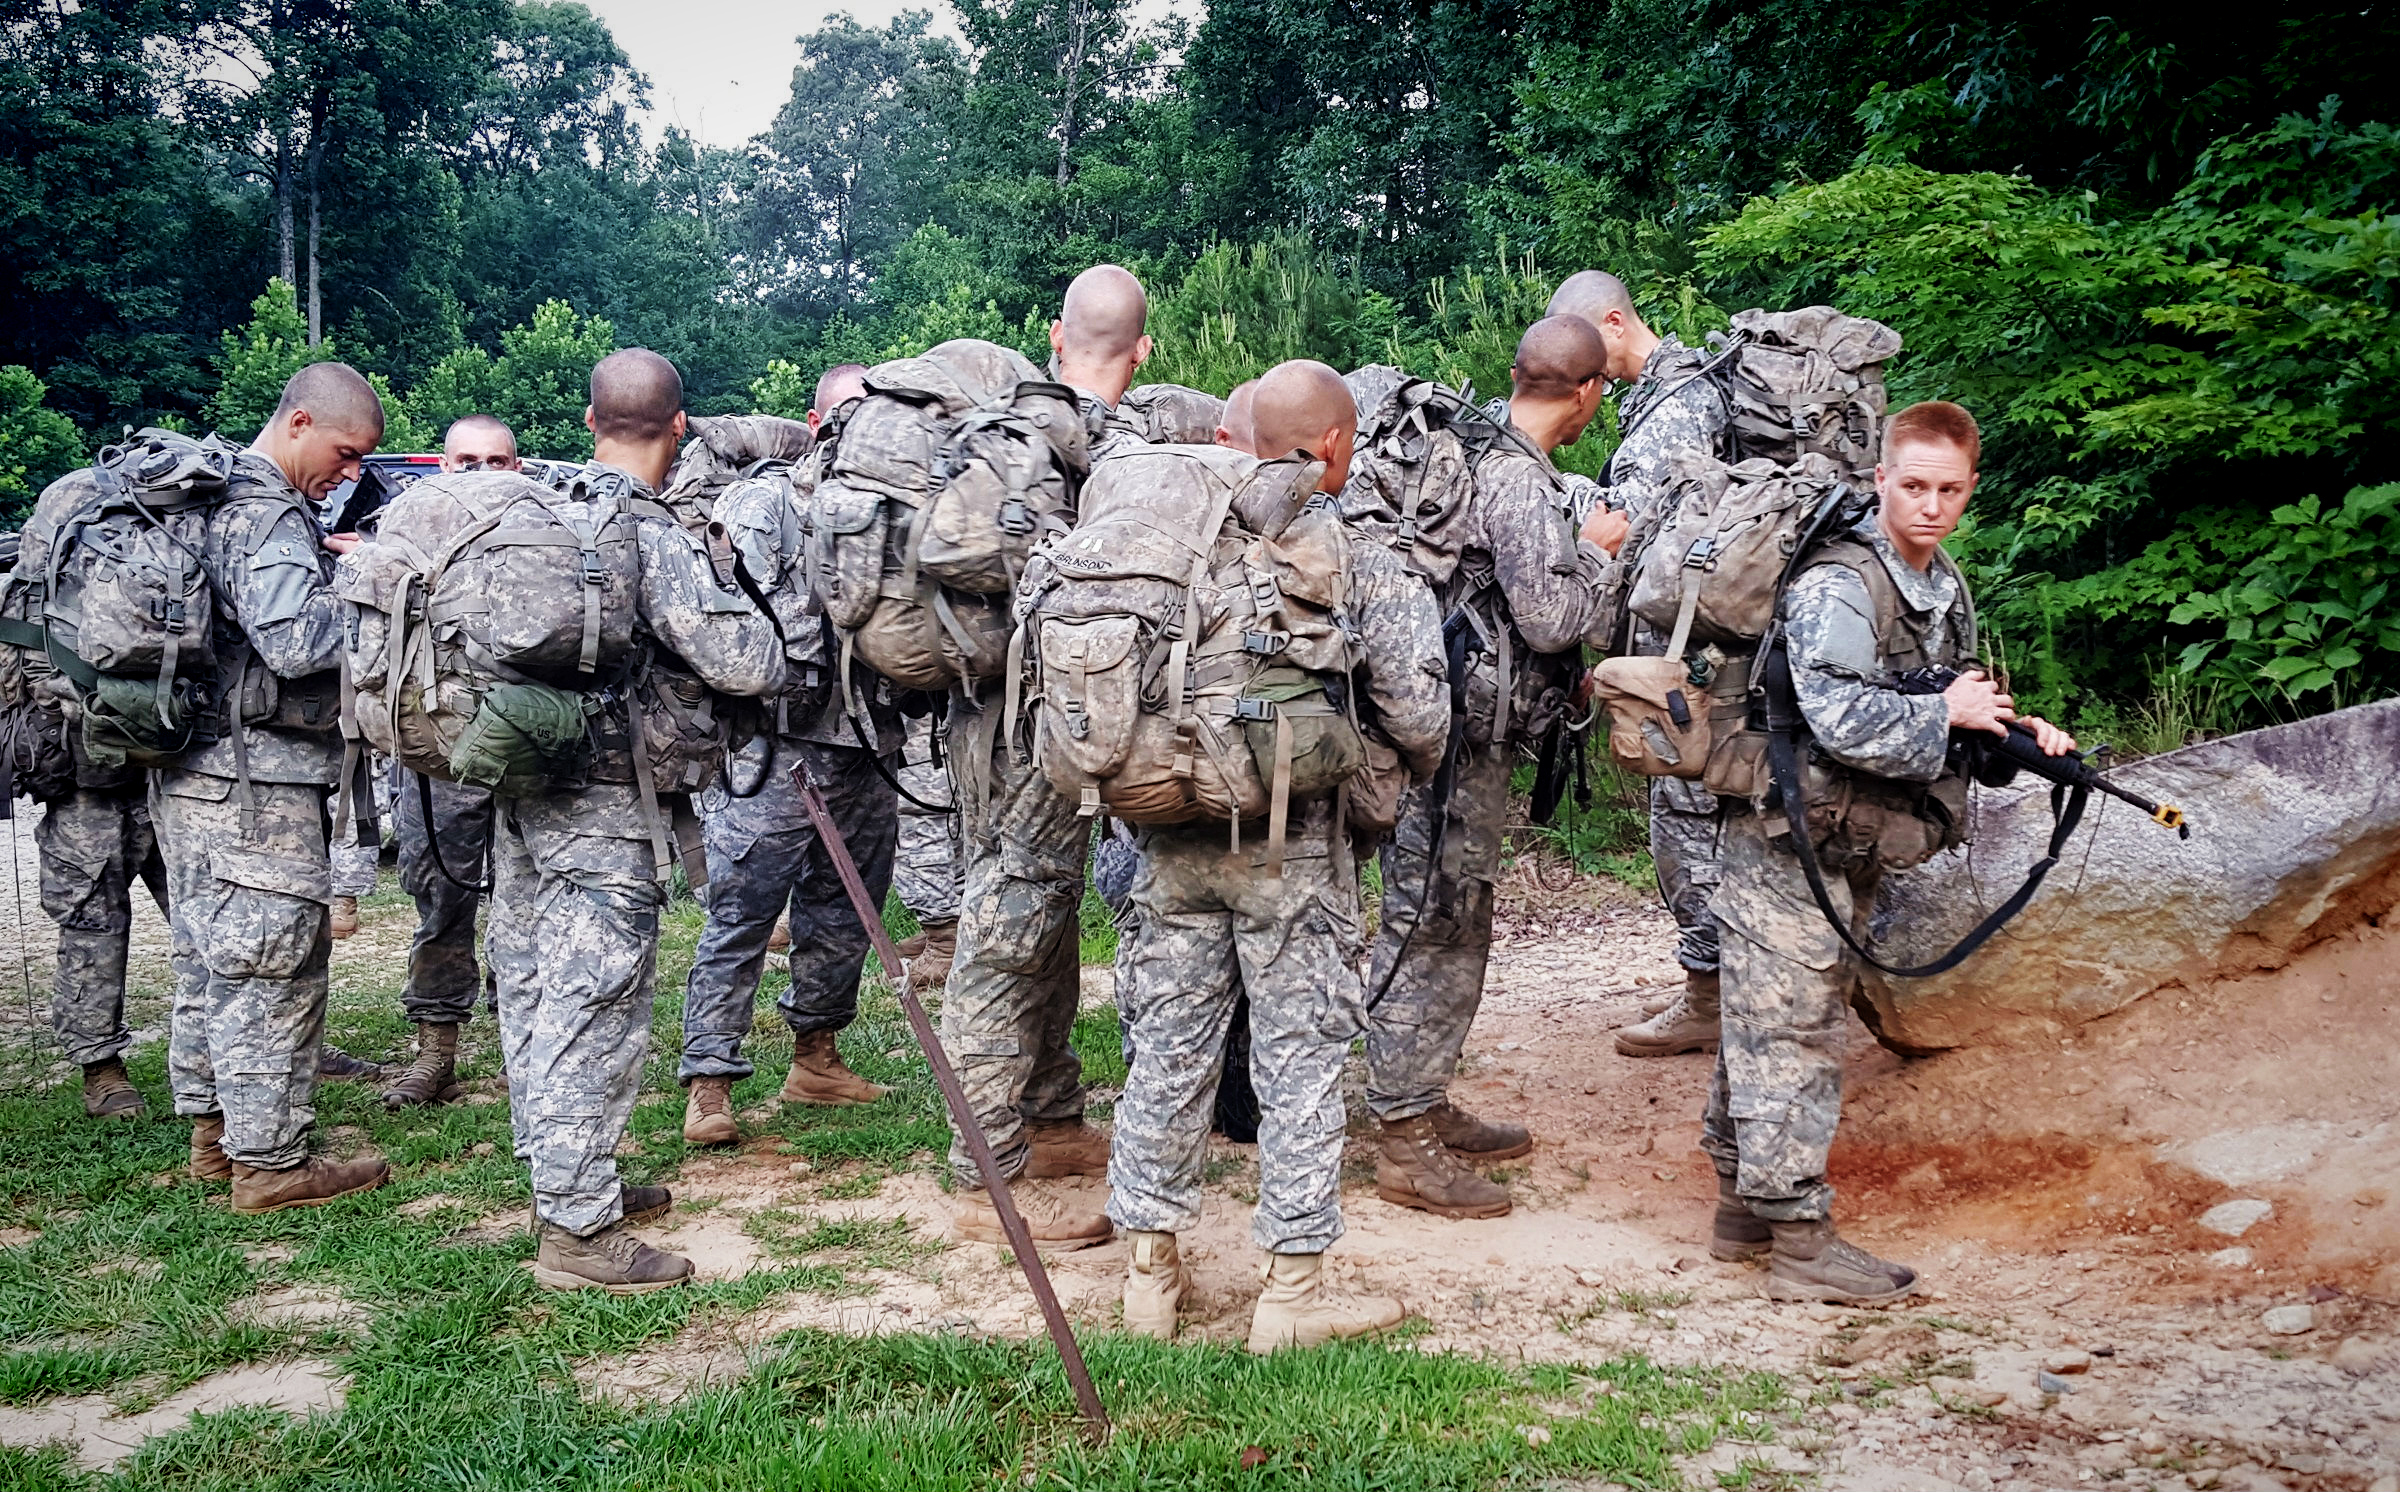 Ranger students, including one of the first women ever to take the Ranger School course, wait to ascend Mount Yonah in northern Georgias  on Tuesday, July 14, 2015 as part of the school's Mountain Phase. (Dan Lamothe—The Washington Post/Getty Images)